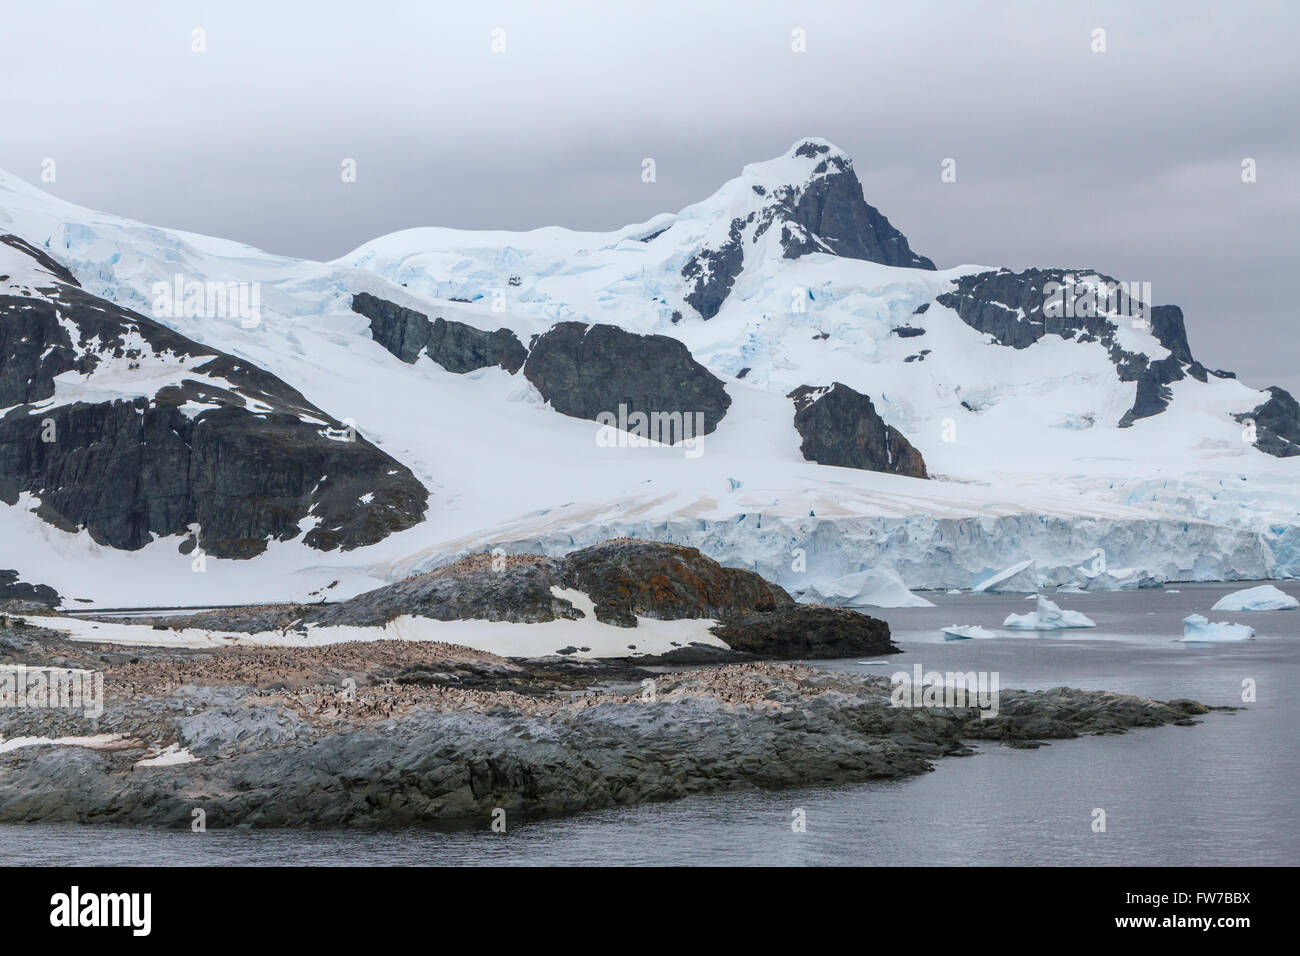 A Gentoo penguin rookery on Cuverville Island, Antarctica. Stock Photo